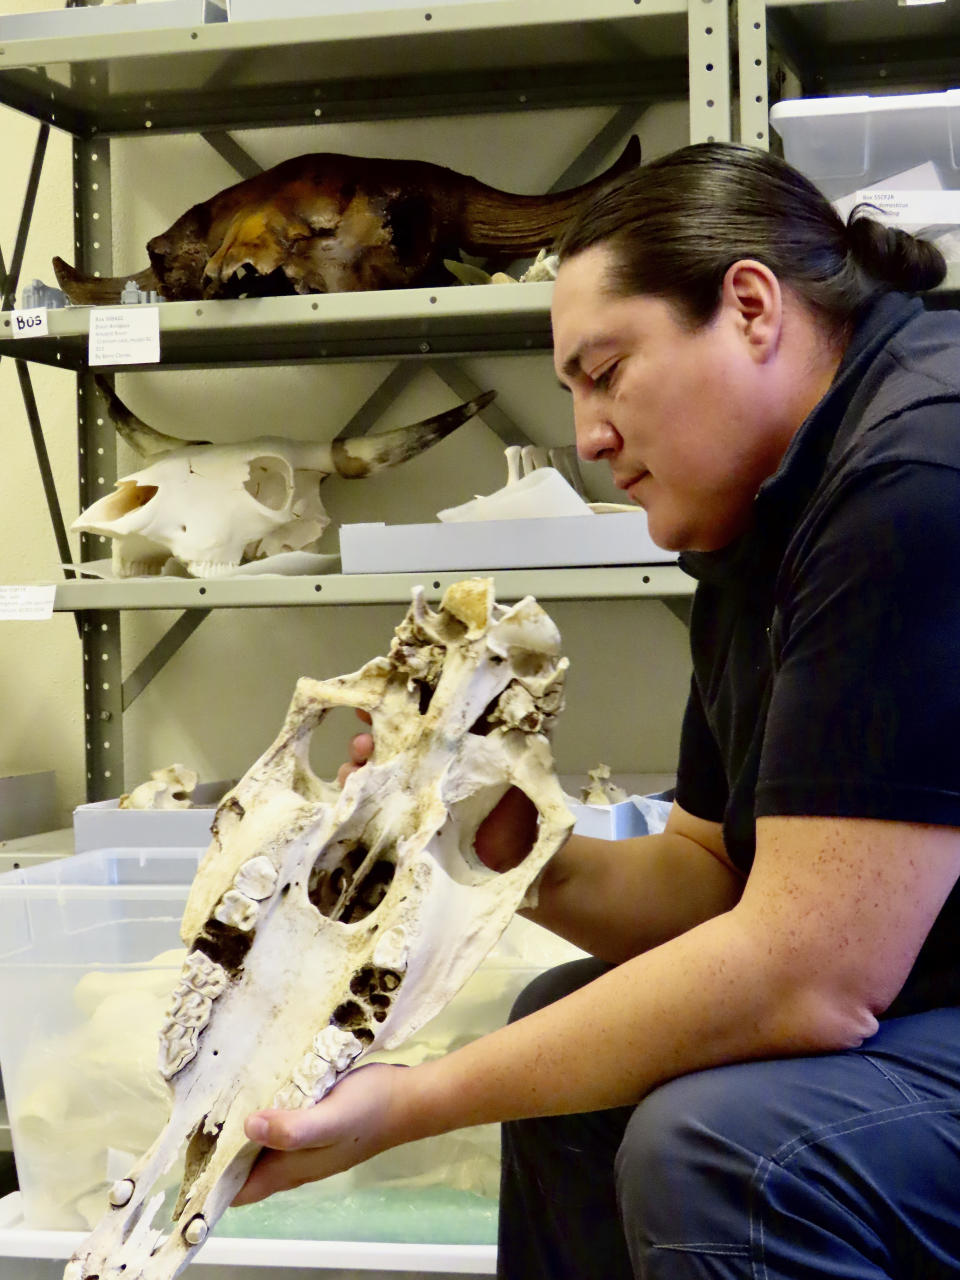 In this photo provided by the University of Colorado-Boulder, Lakota archaeologist Chance Ward examines horse reference collections in the Archaeozoology Laboratory at the University of Colorado-Boulder in October 2020. In a study published Thursday, March 30, 2023, in the journalScience, a new analysis of horse bones gathered from museums across the Great Plains and northern Rockies has revealed that horses were present in the grasslands by the early 1600s, an earlier date than many written histories suggest. (Samantha Eads/University of Colorado-Boulder via AP)